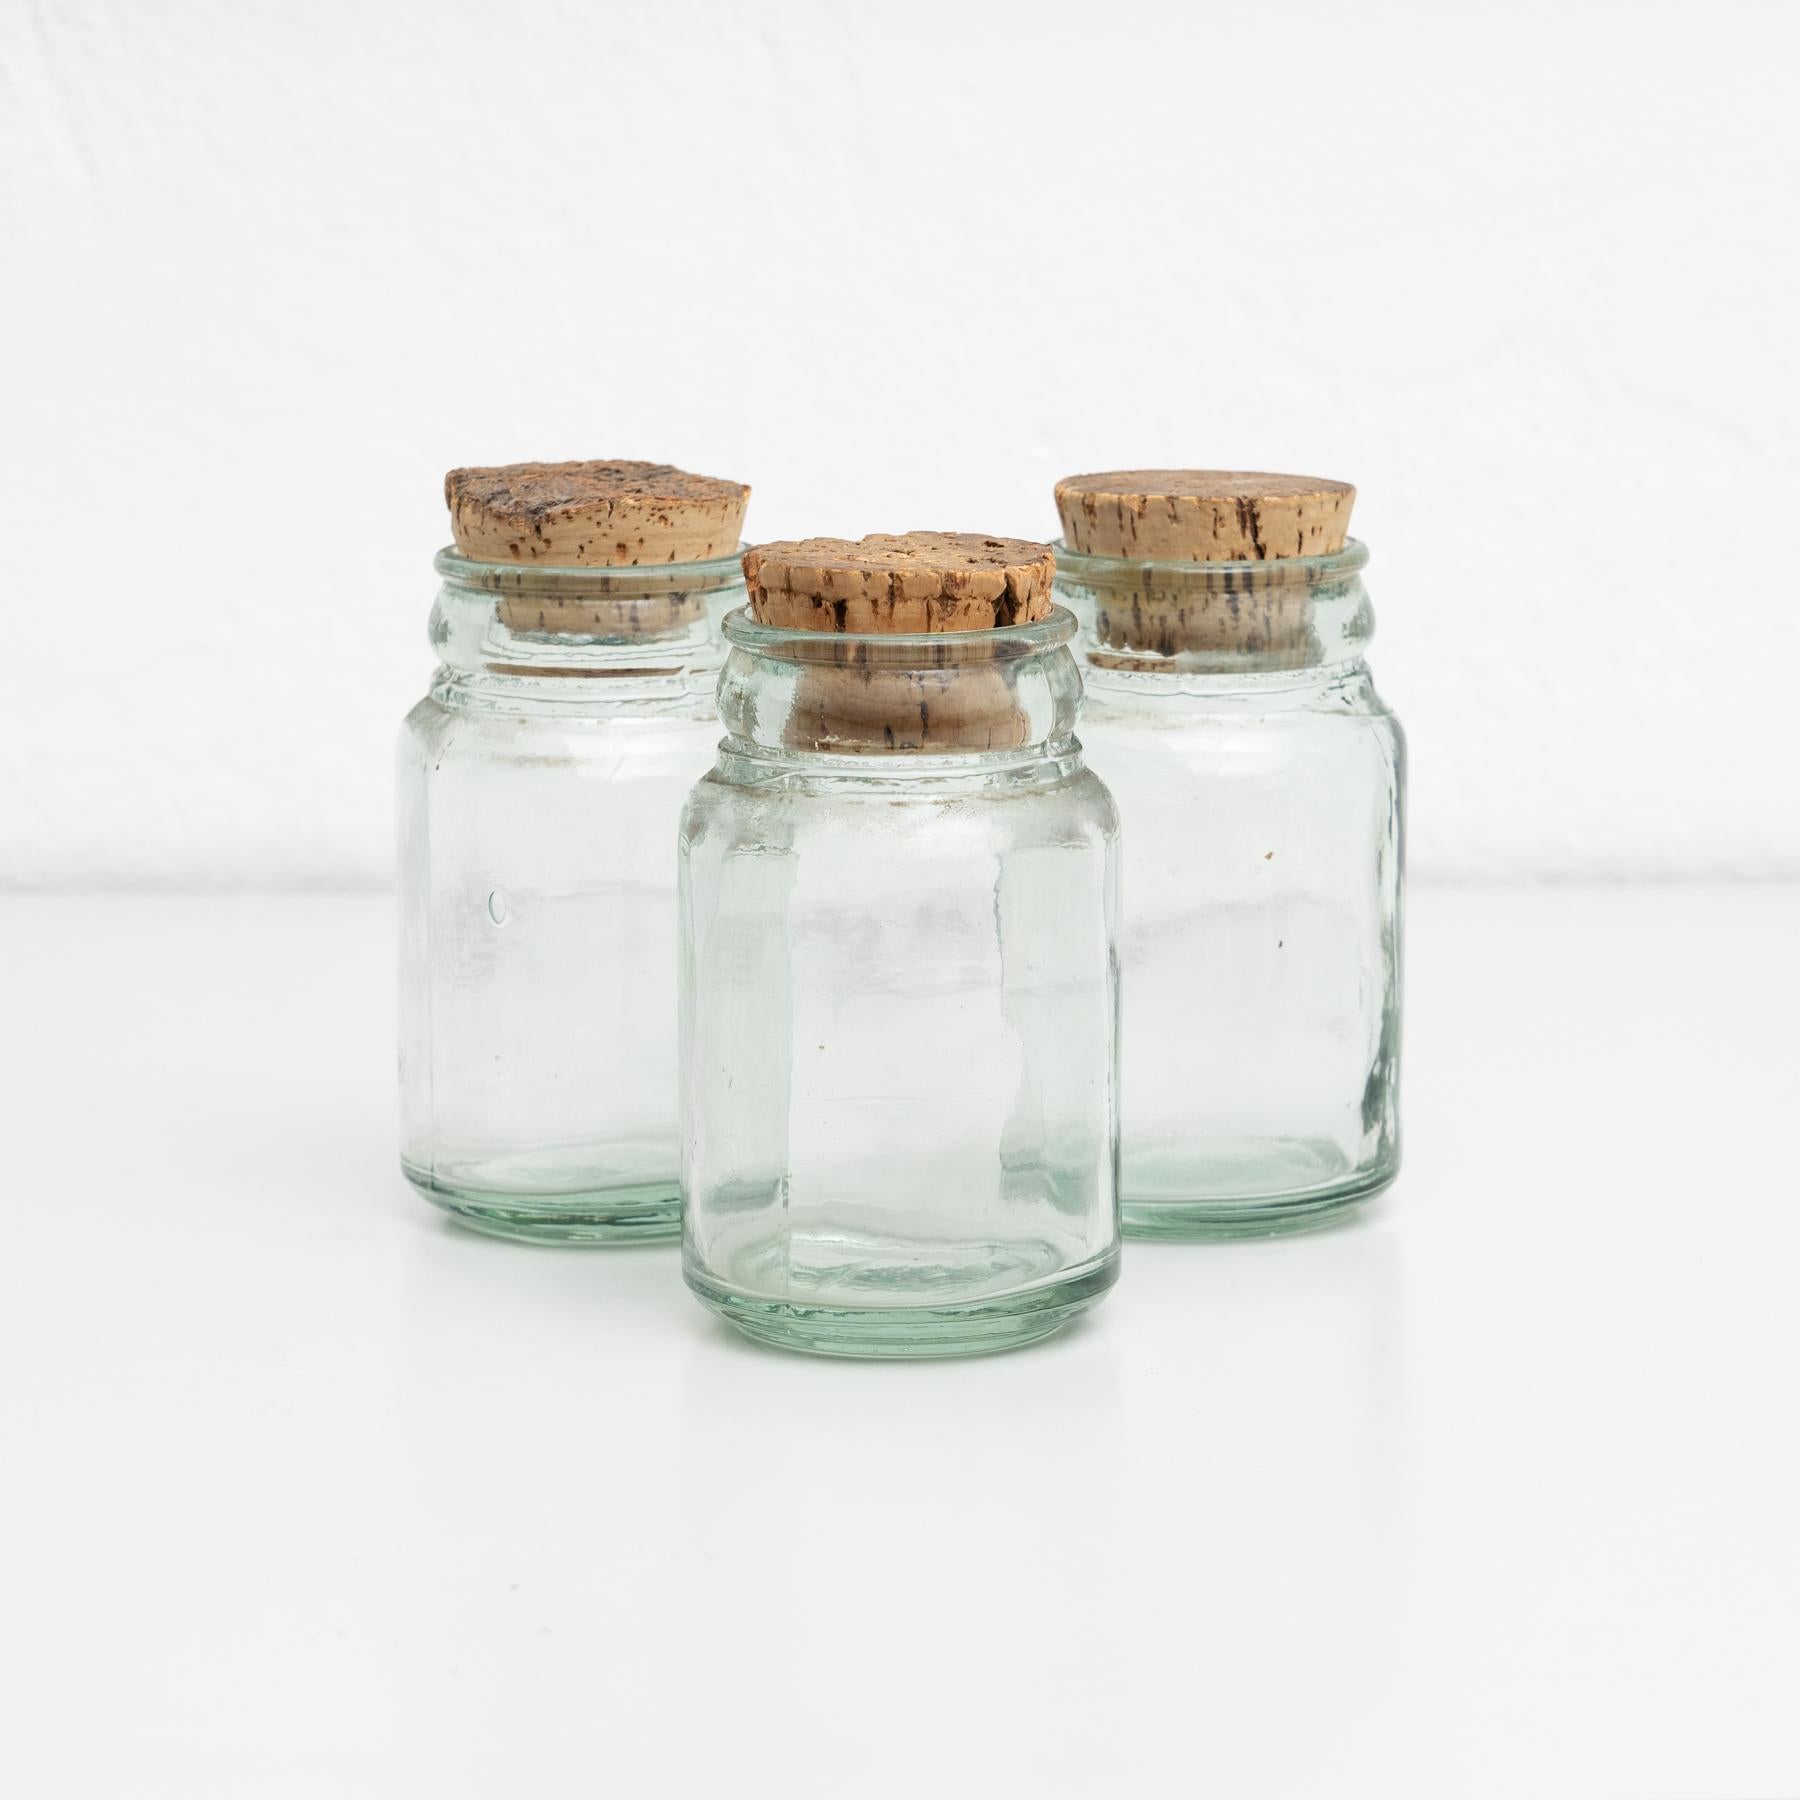 Set of three antique Spanish glass containers dedicated to preserve food. All of them presenting a cork cap.

Made by unknown manufacturer in Spain, circa 1950.

In original condition, with minor wear consistent with age and use, preserving a